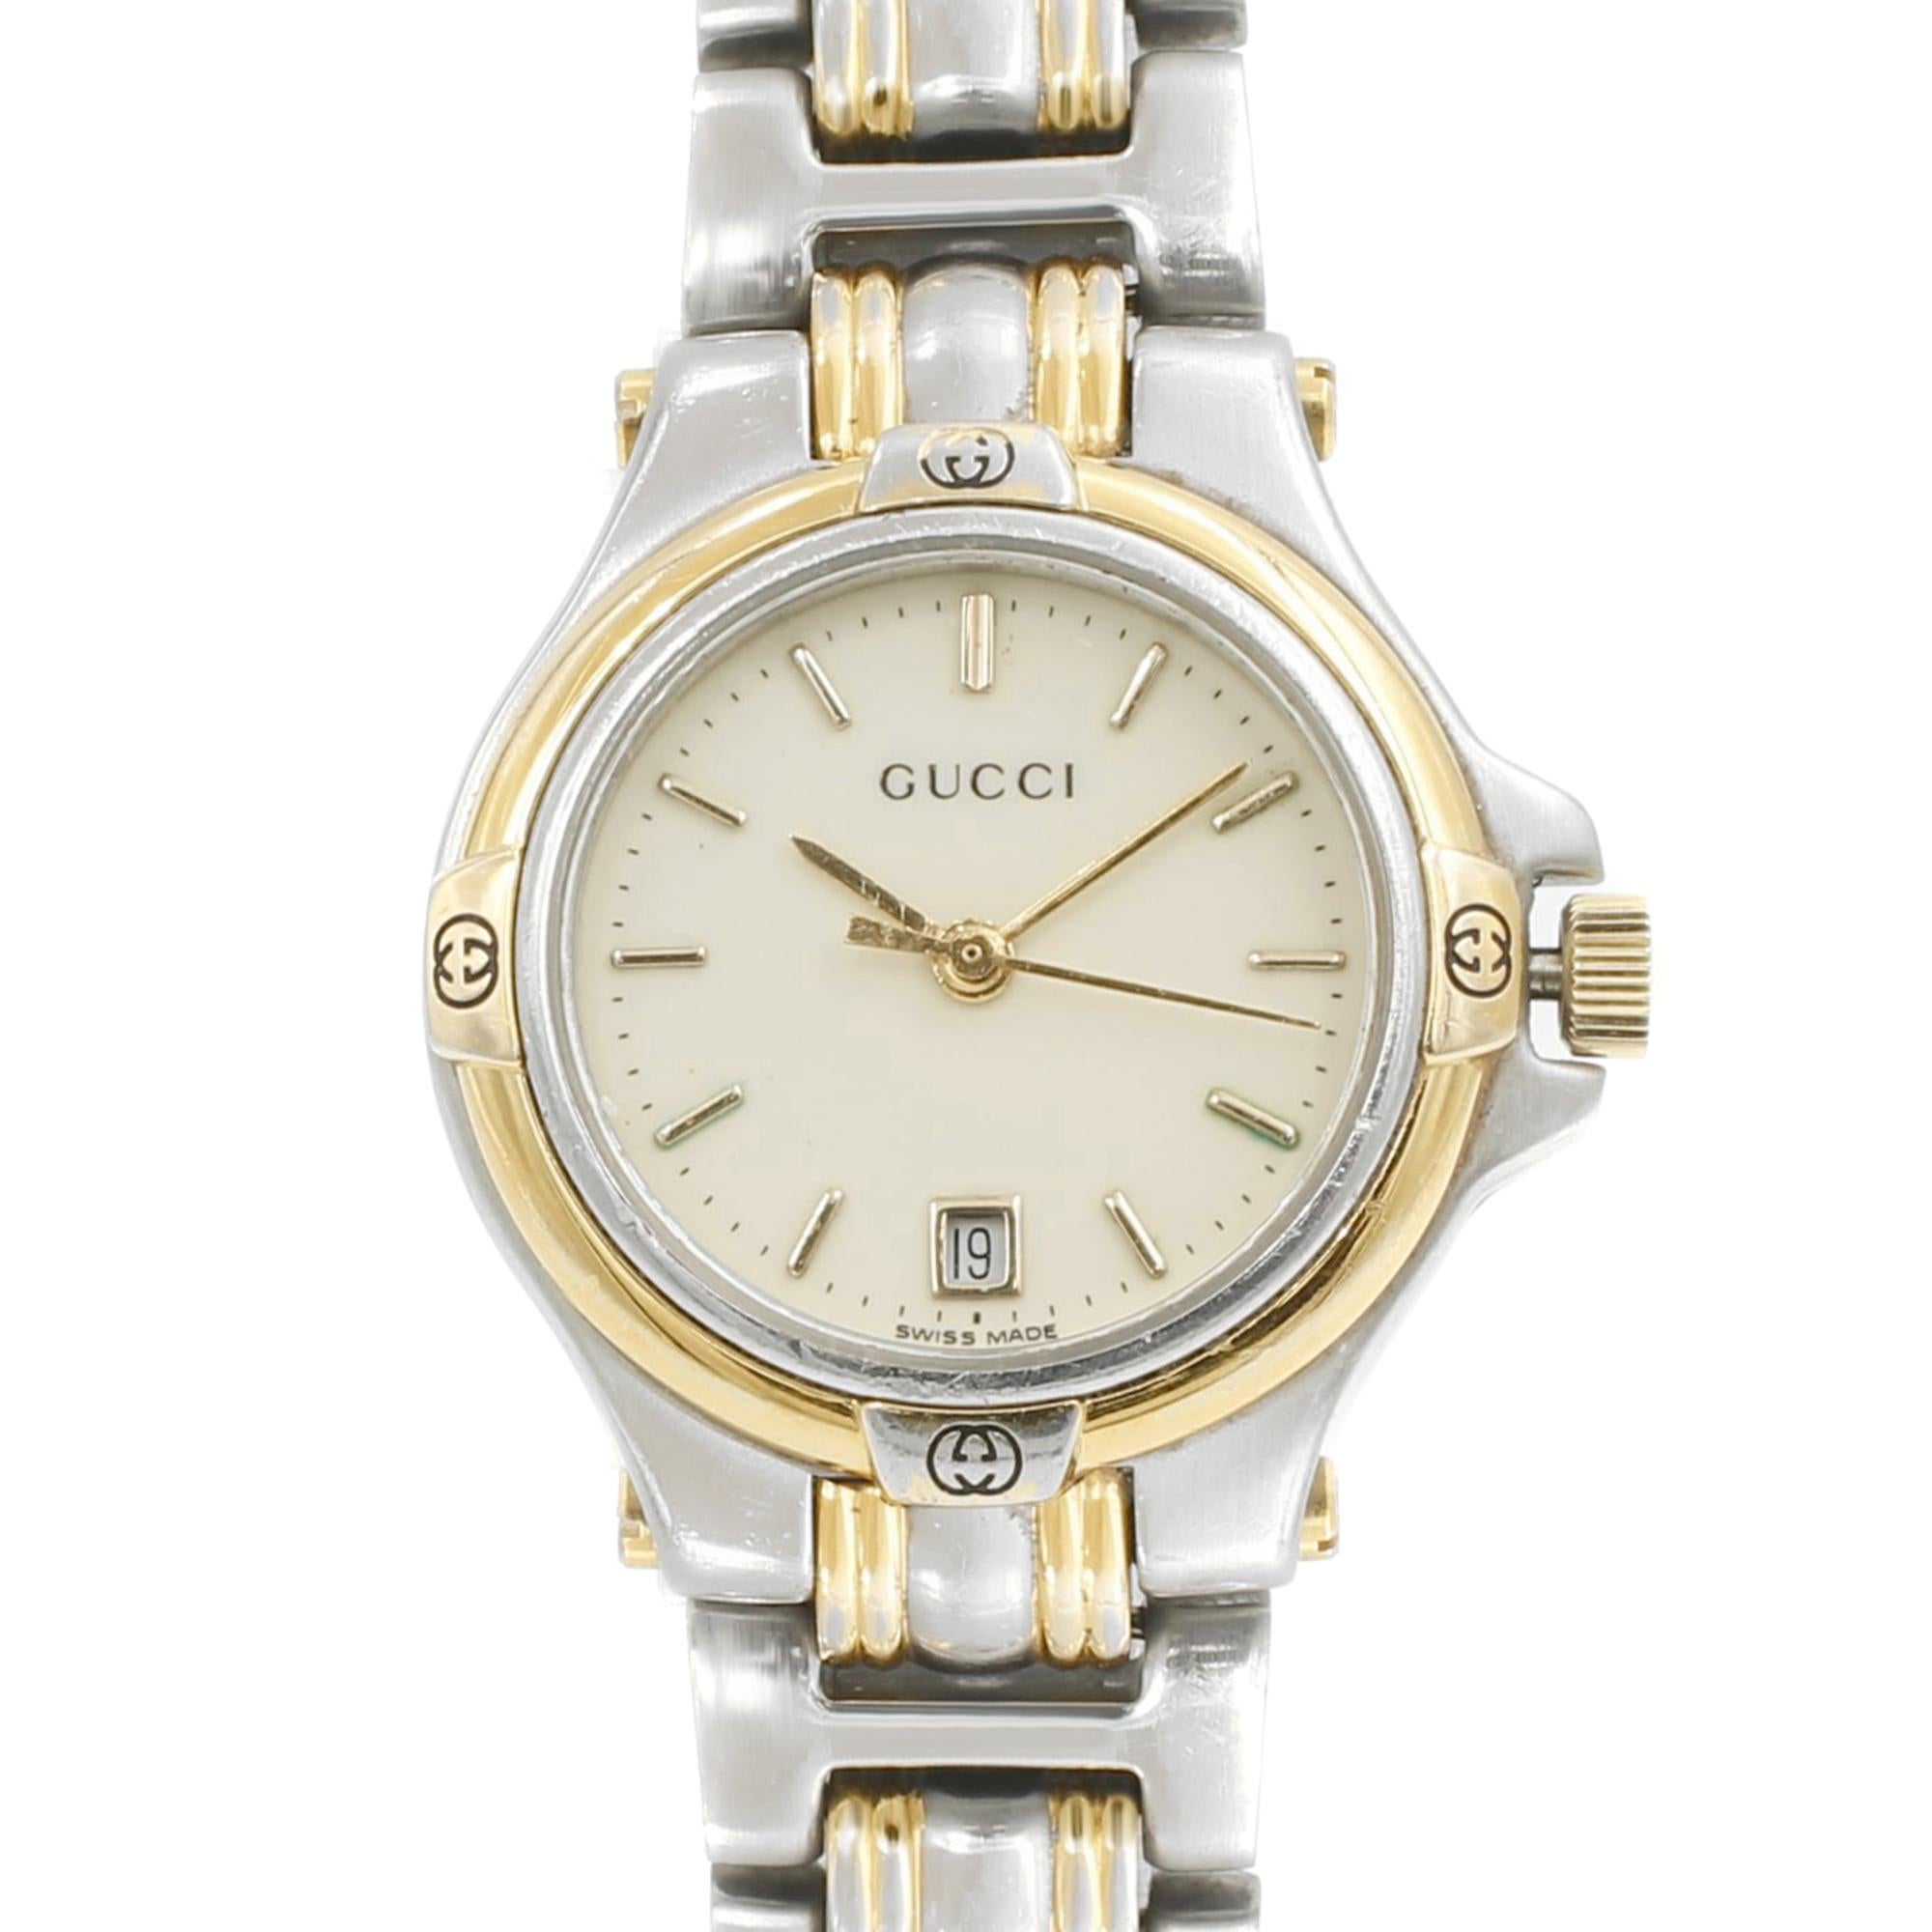 This pre-owned Gucci N/A 9040L is a beautiful Ladies timepiece that is powered by a quartz movement which is cased in a stainless steel case. It has a round shape face, date dial and has hand sticks style markers. It is completed with a stainless